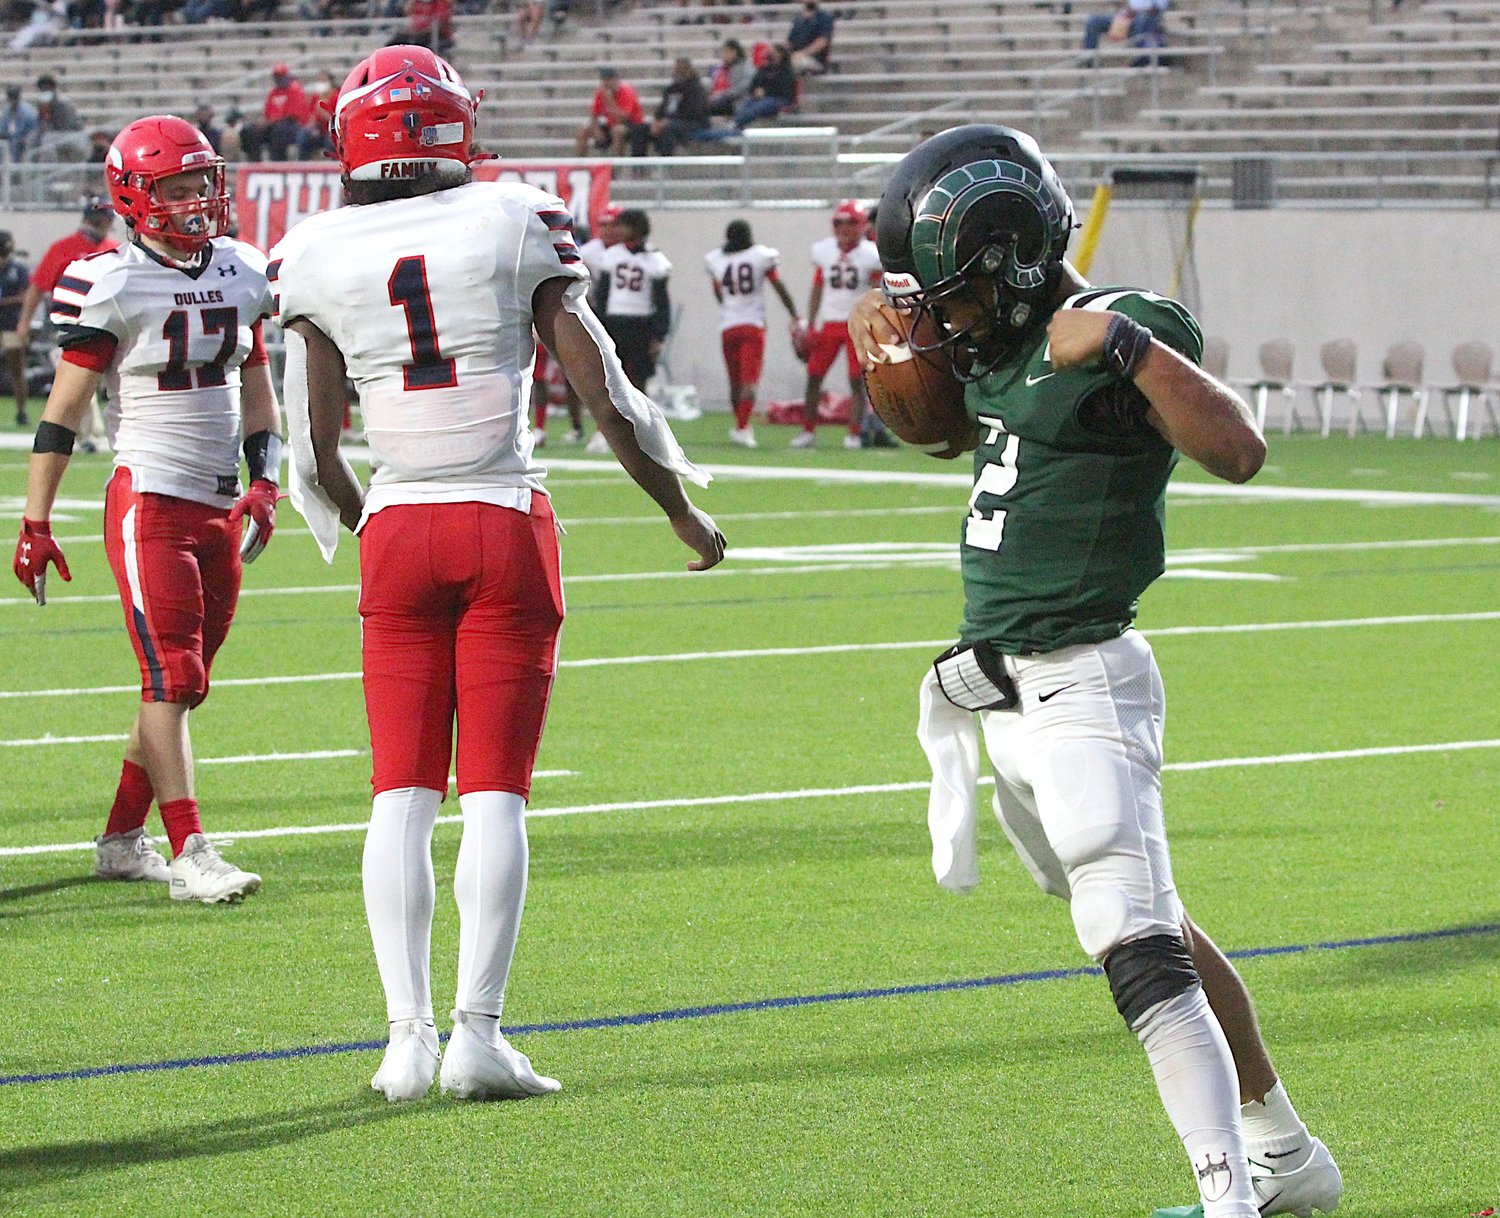 Senior quarterback Jace Wilson (right, pictured celebrating a touchdown during last week's win against Dulles) and the Mayde Creek Rams jumped into the Houston area high school football media poll this week, coming in at No. 19.